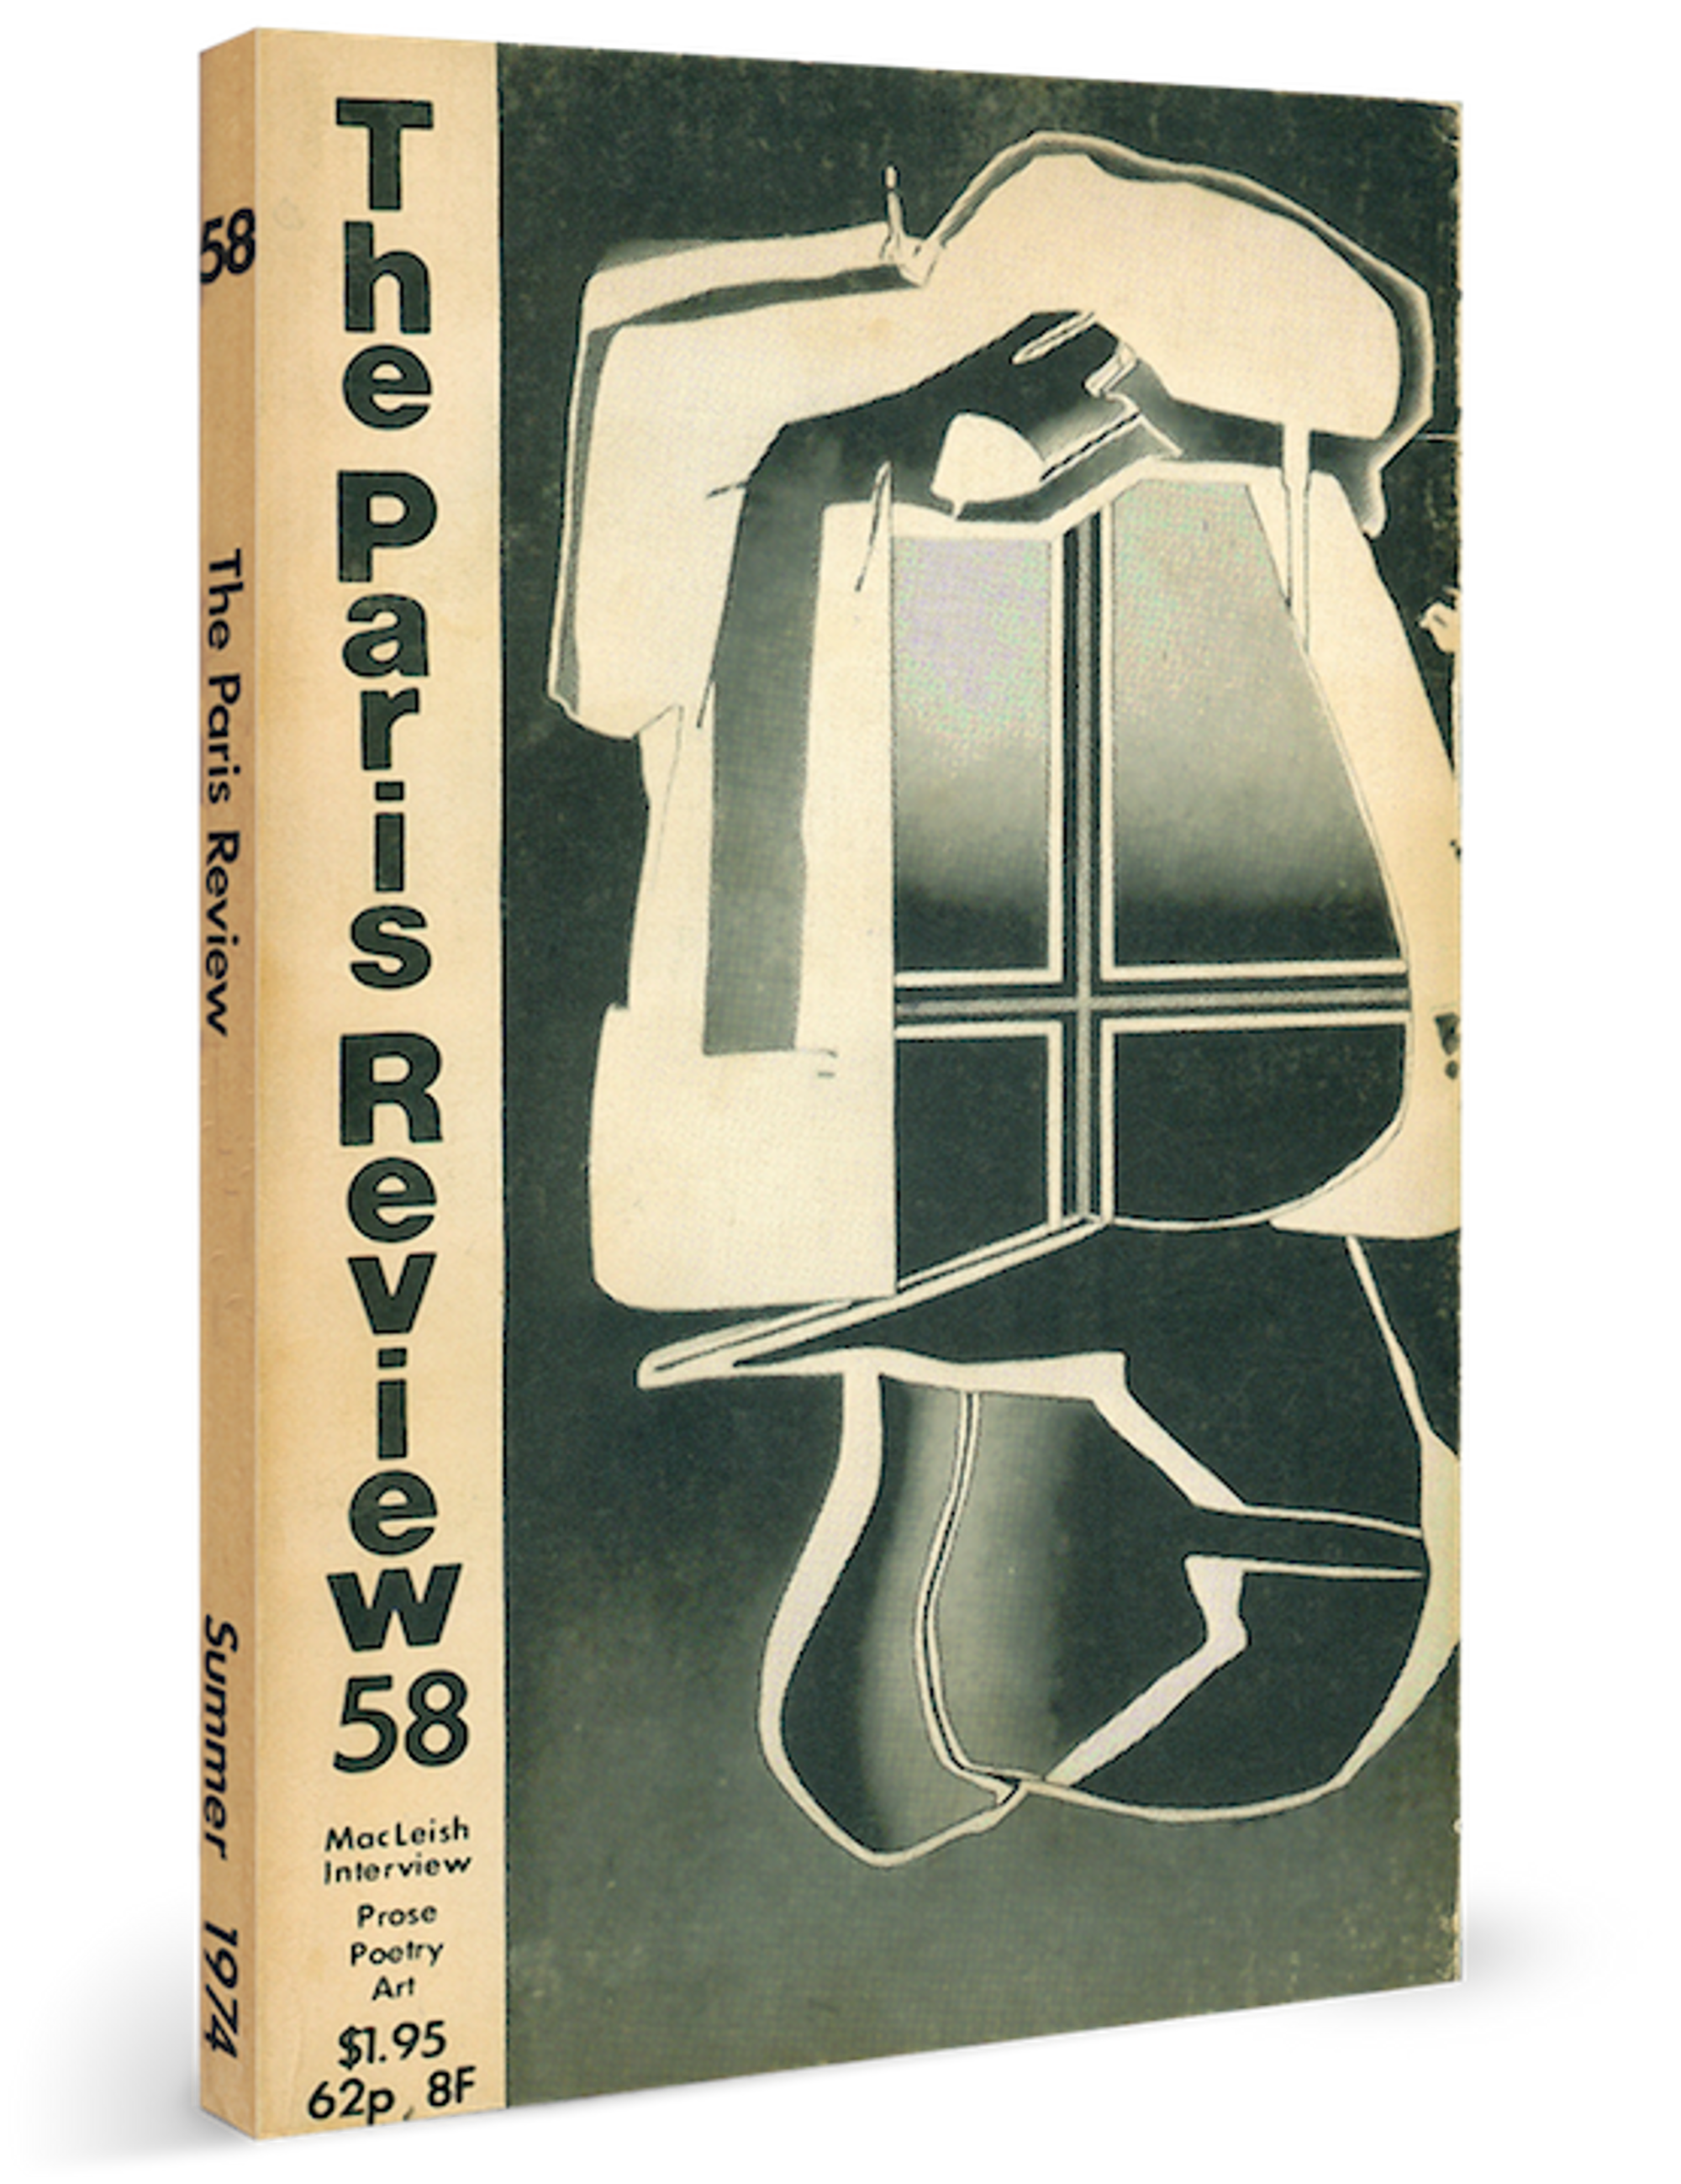 Detail view of Issue No. 58 Cover against a plain gray background